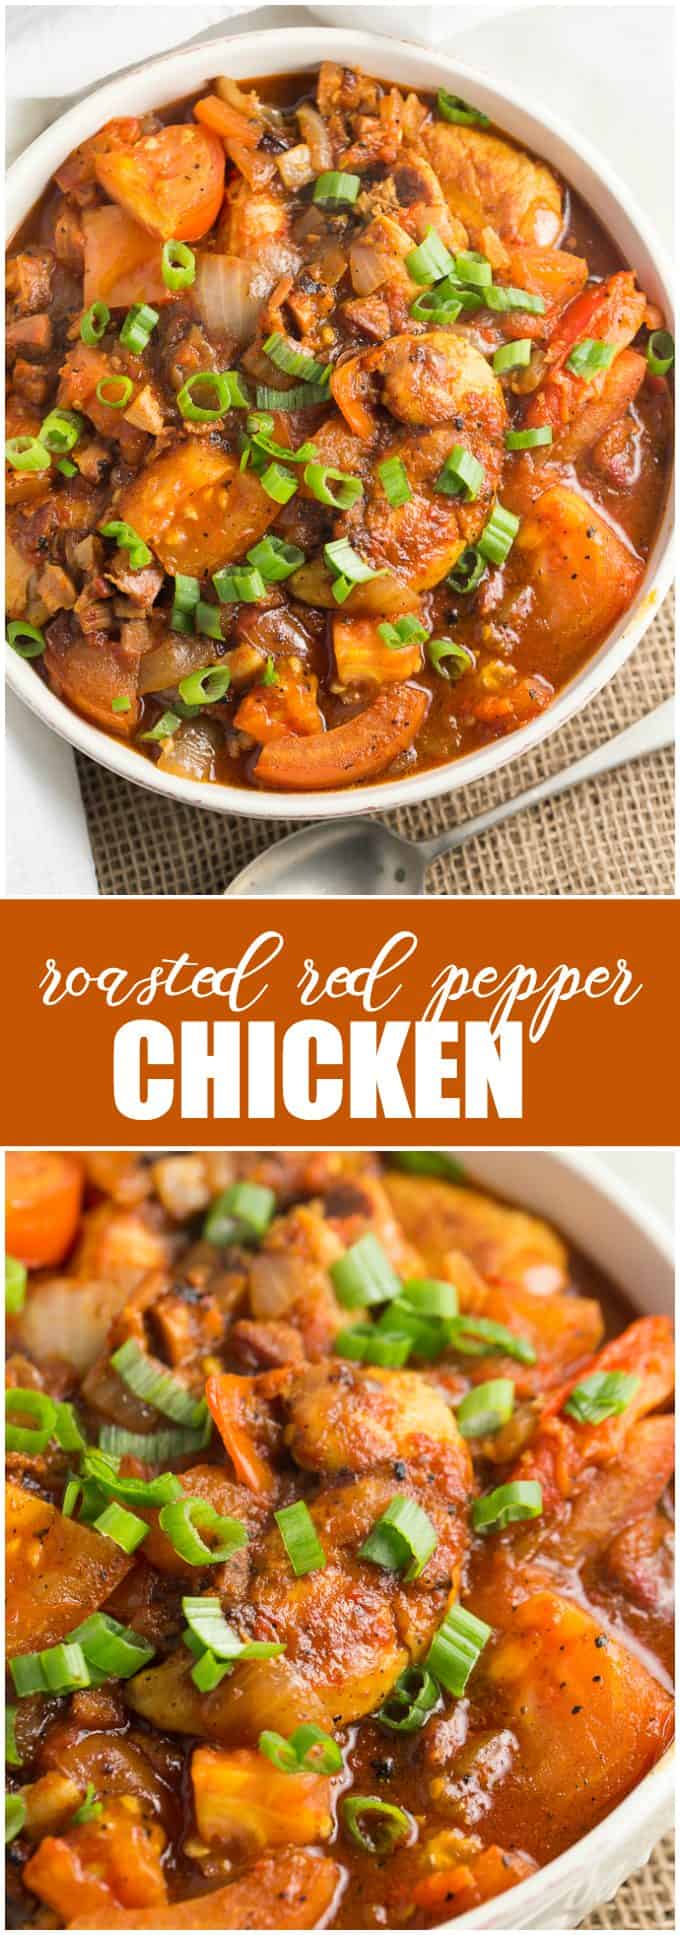 Roasted Red Pepper Chicken - This savory dinner recipe packs a little heat and is totally low carb! The pancetta really makes this chicken recipe amazing.